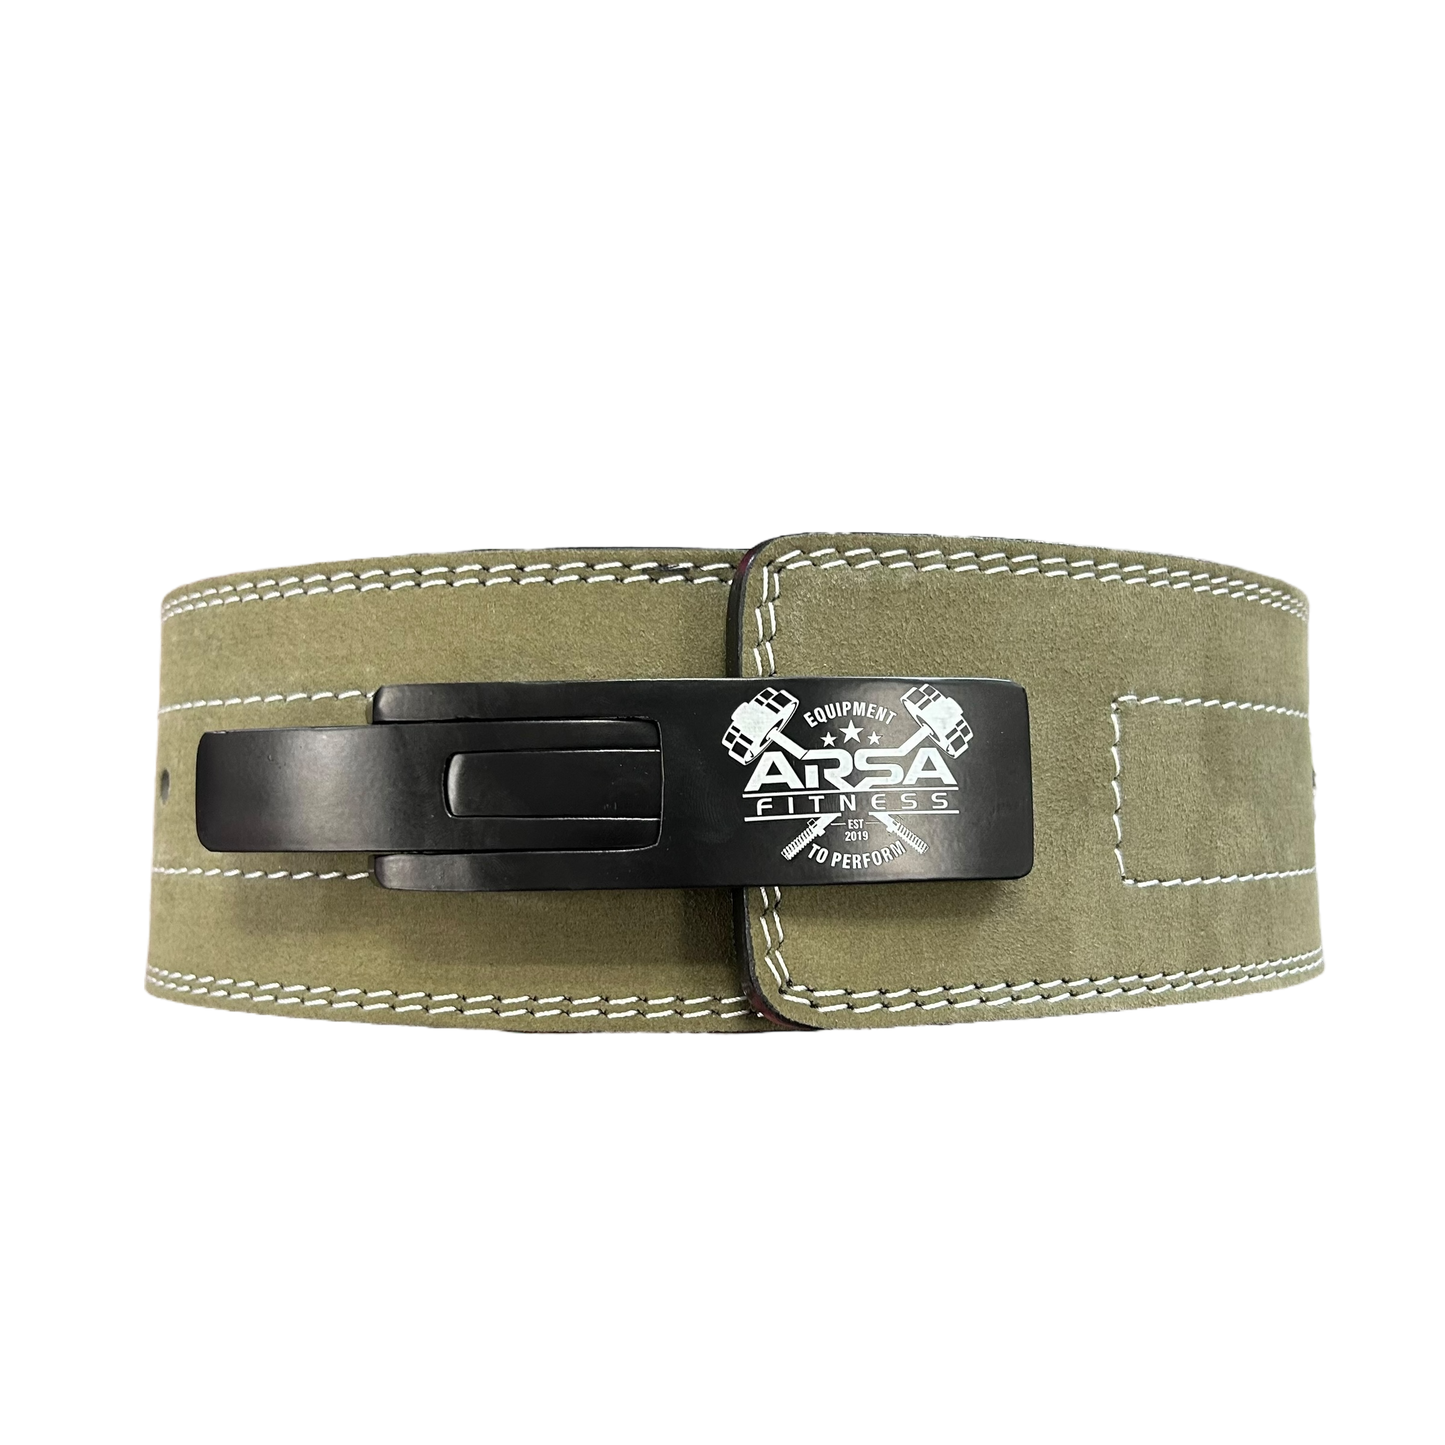 10mm Lever Double Stitch Weightlifting Belt - Suede Leather Green